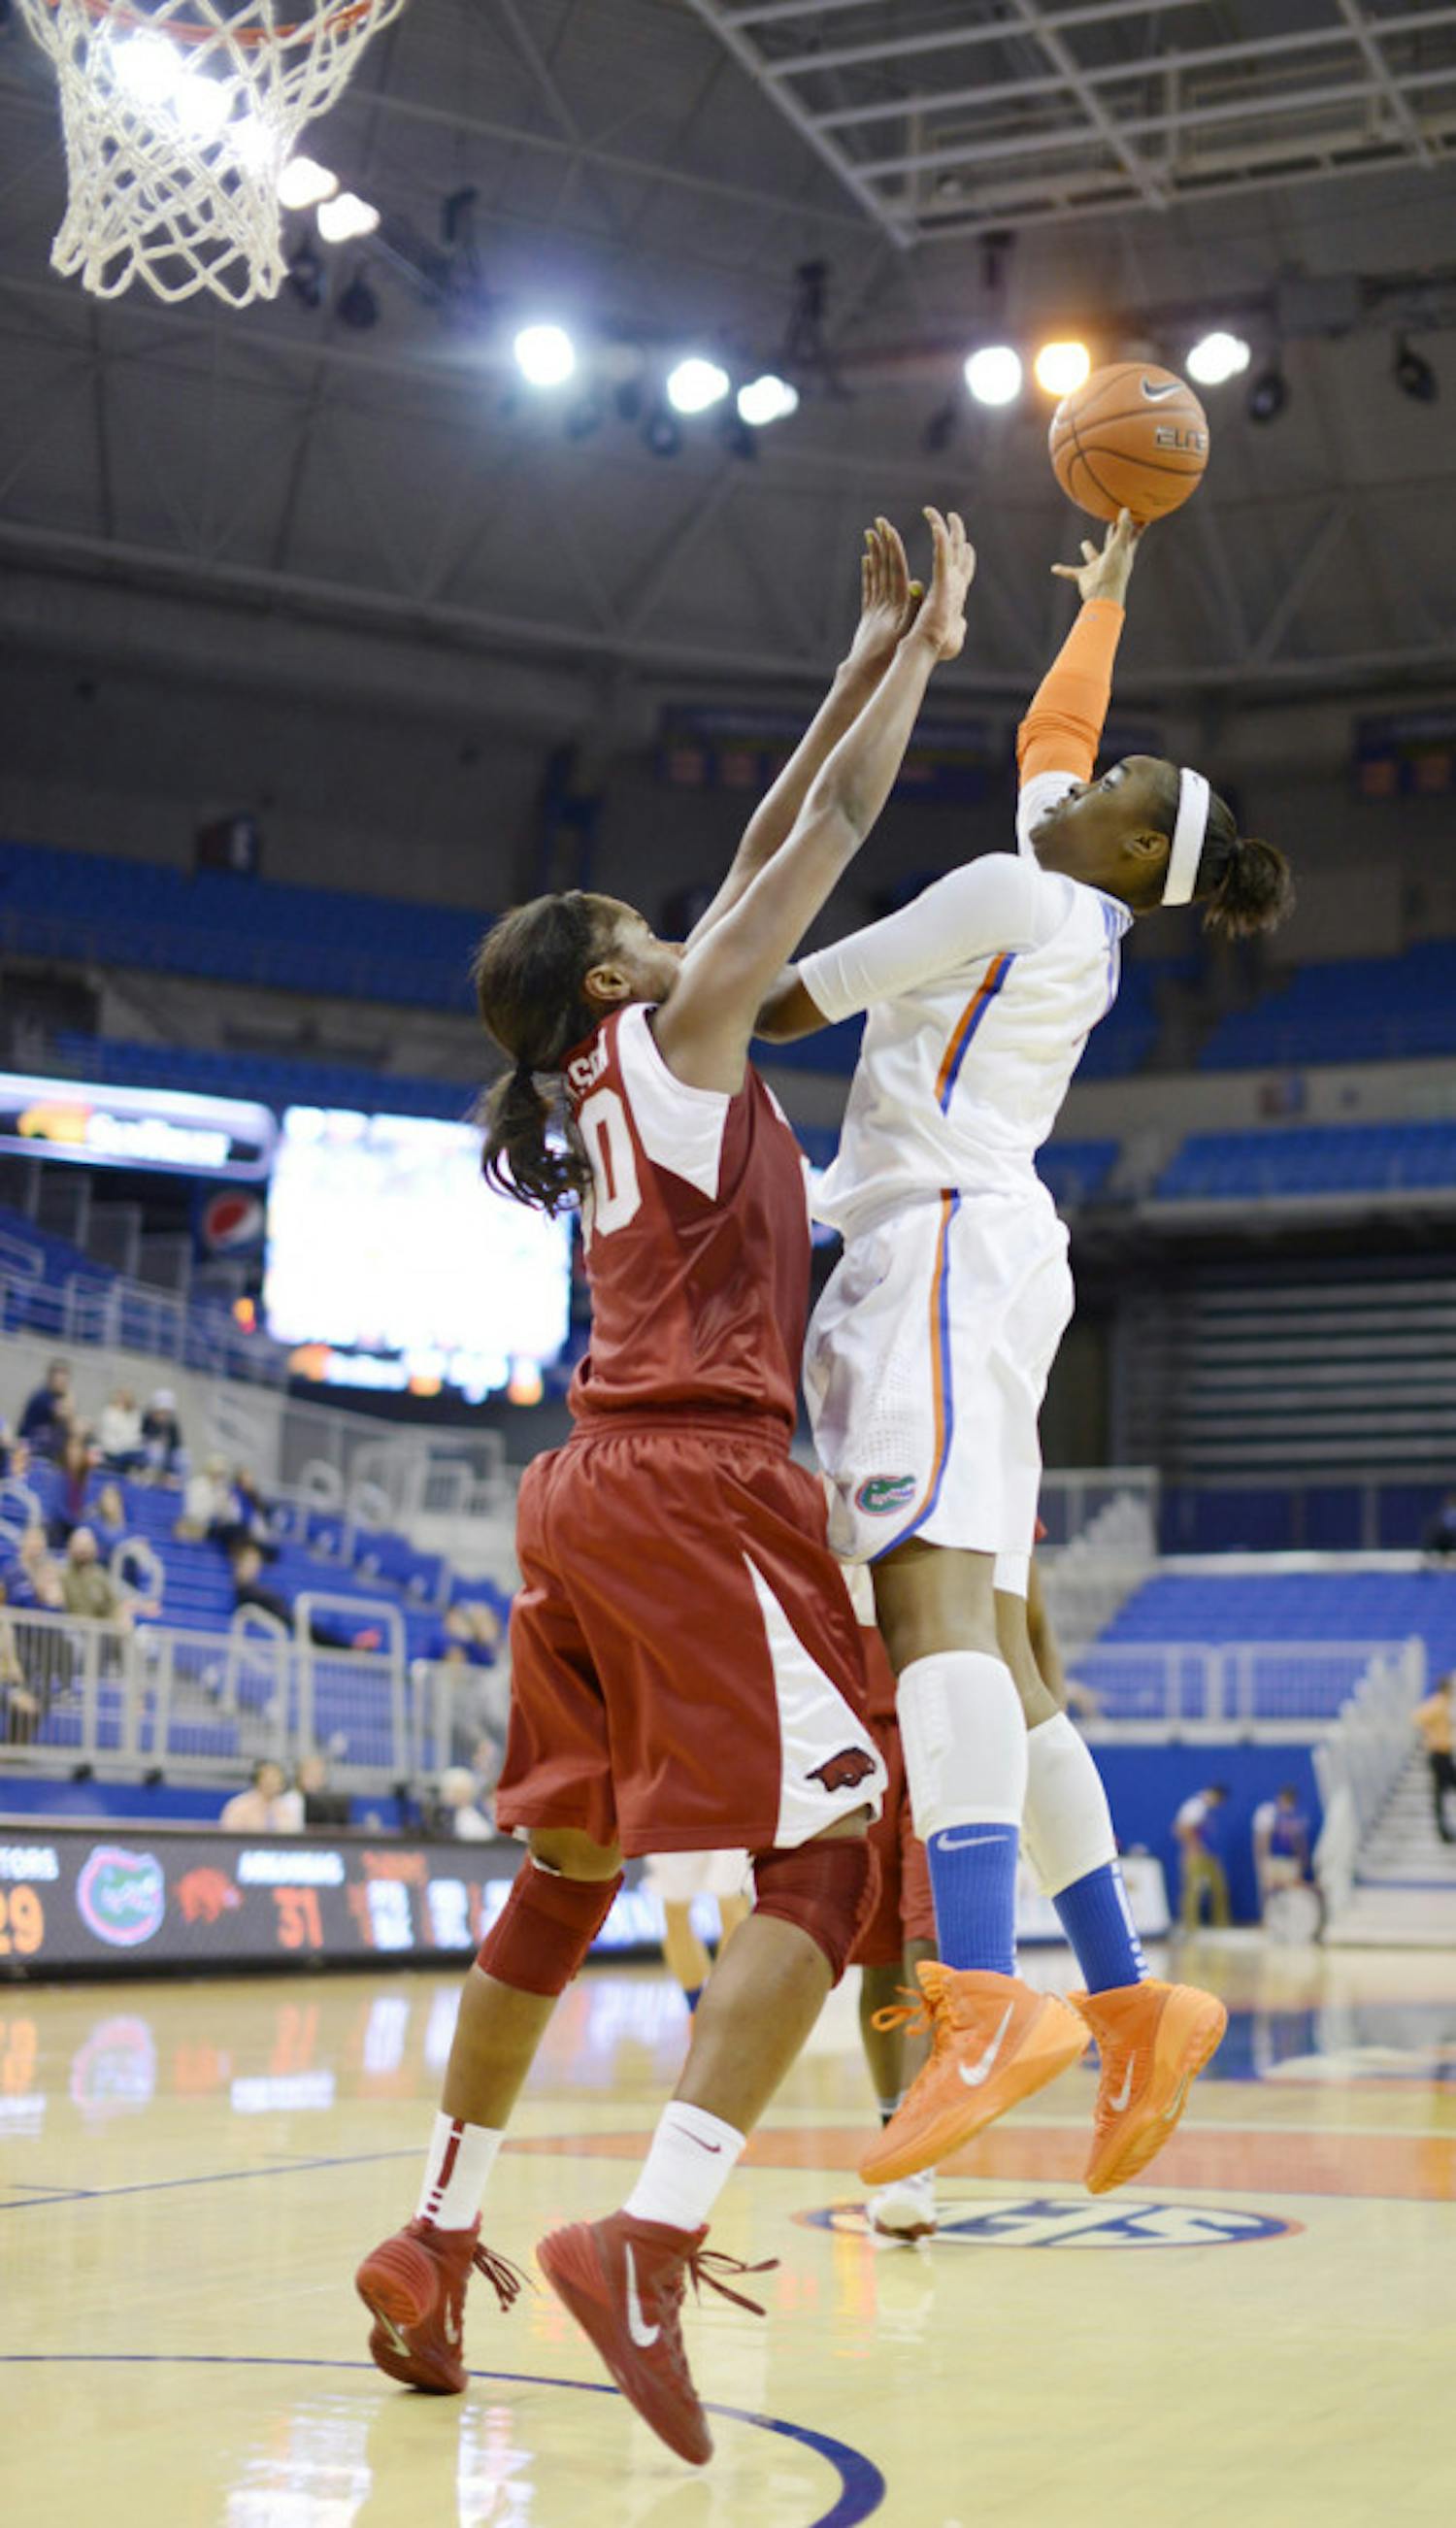 Ronni Williams attempts a layup in Florida’s 59-52 win against Arkansas on Jan. 9 in the O’Connell Center. Williams fouled out for the 11th time this season on Sunday.